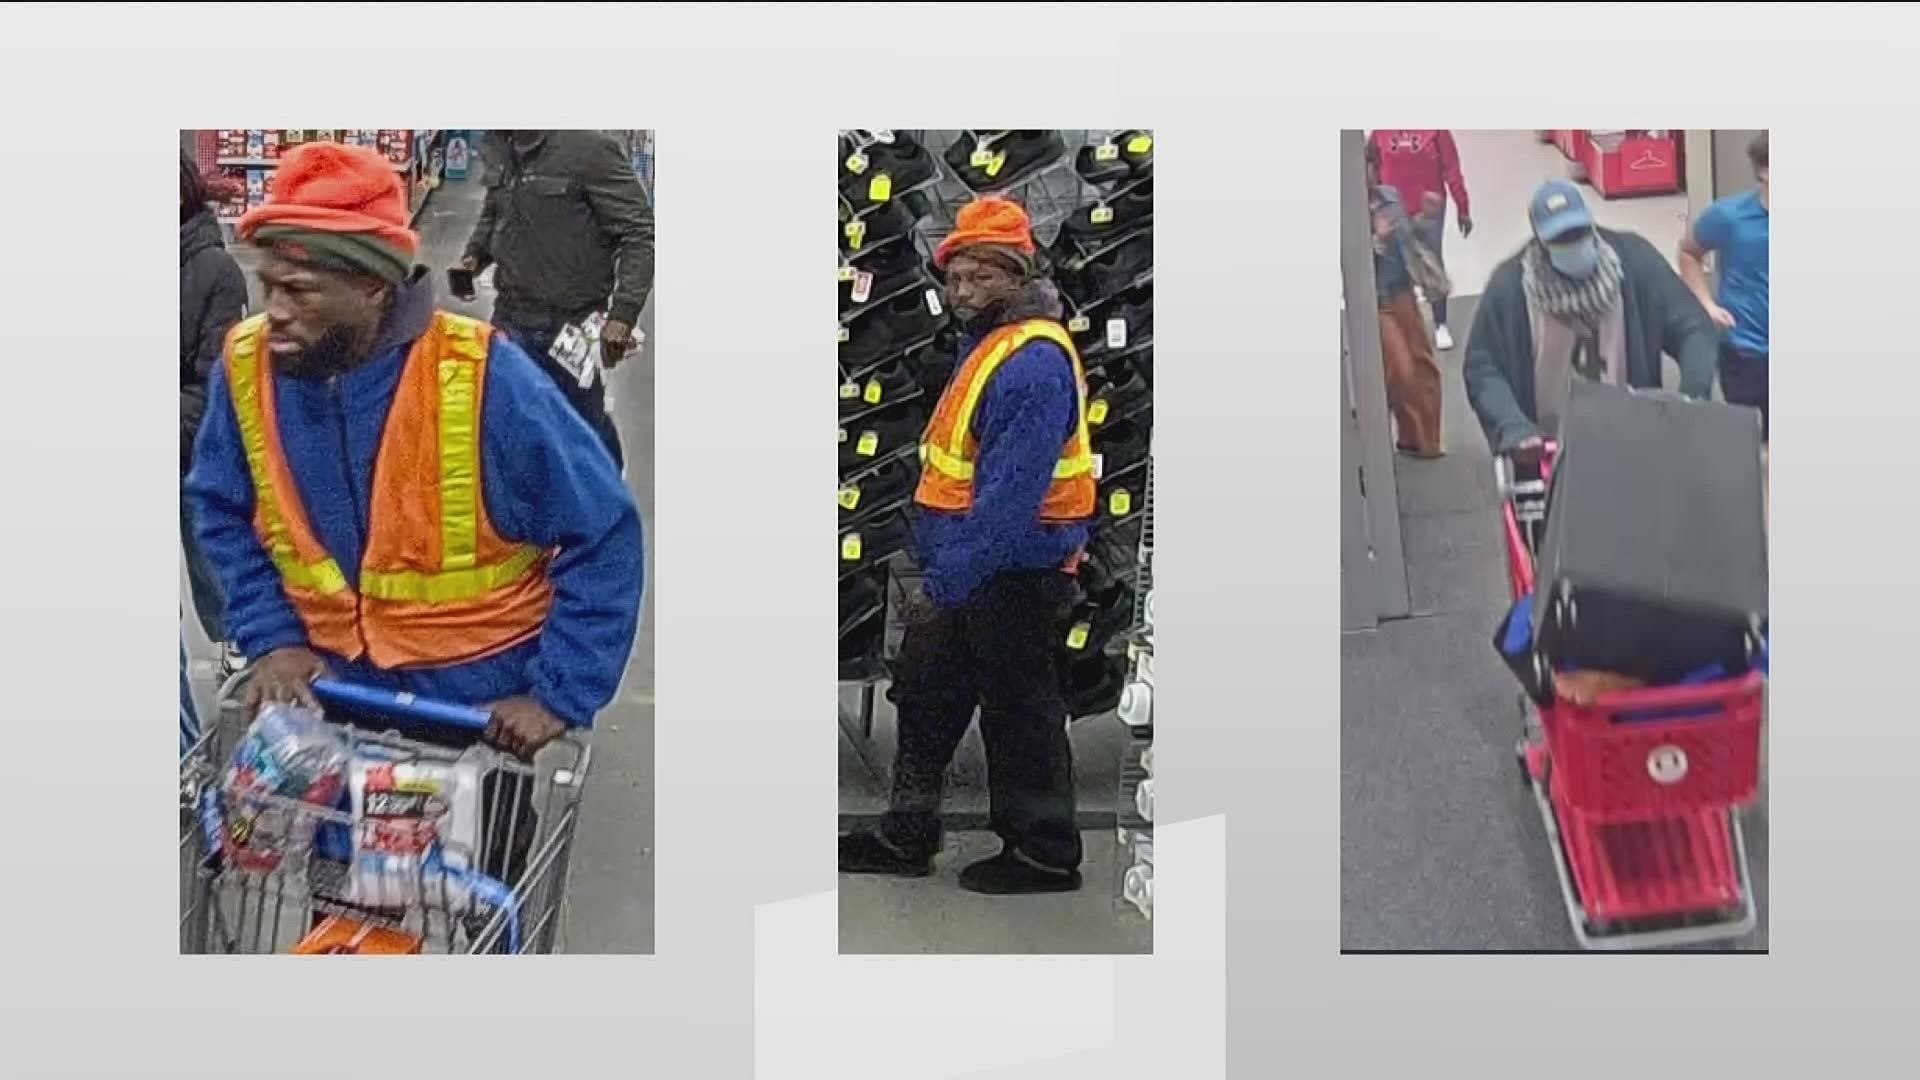 Atlanta Fire Department believes the suspects are responsible for setting recent fires at metro Atlanta stores.